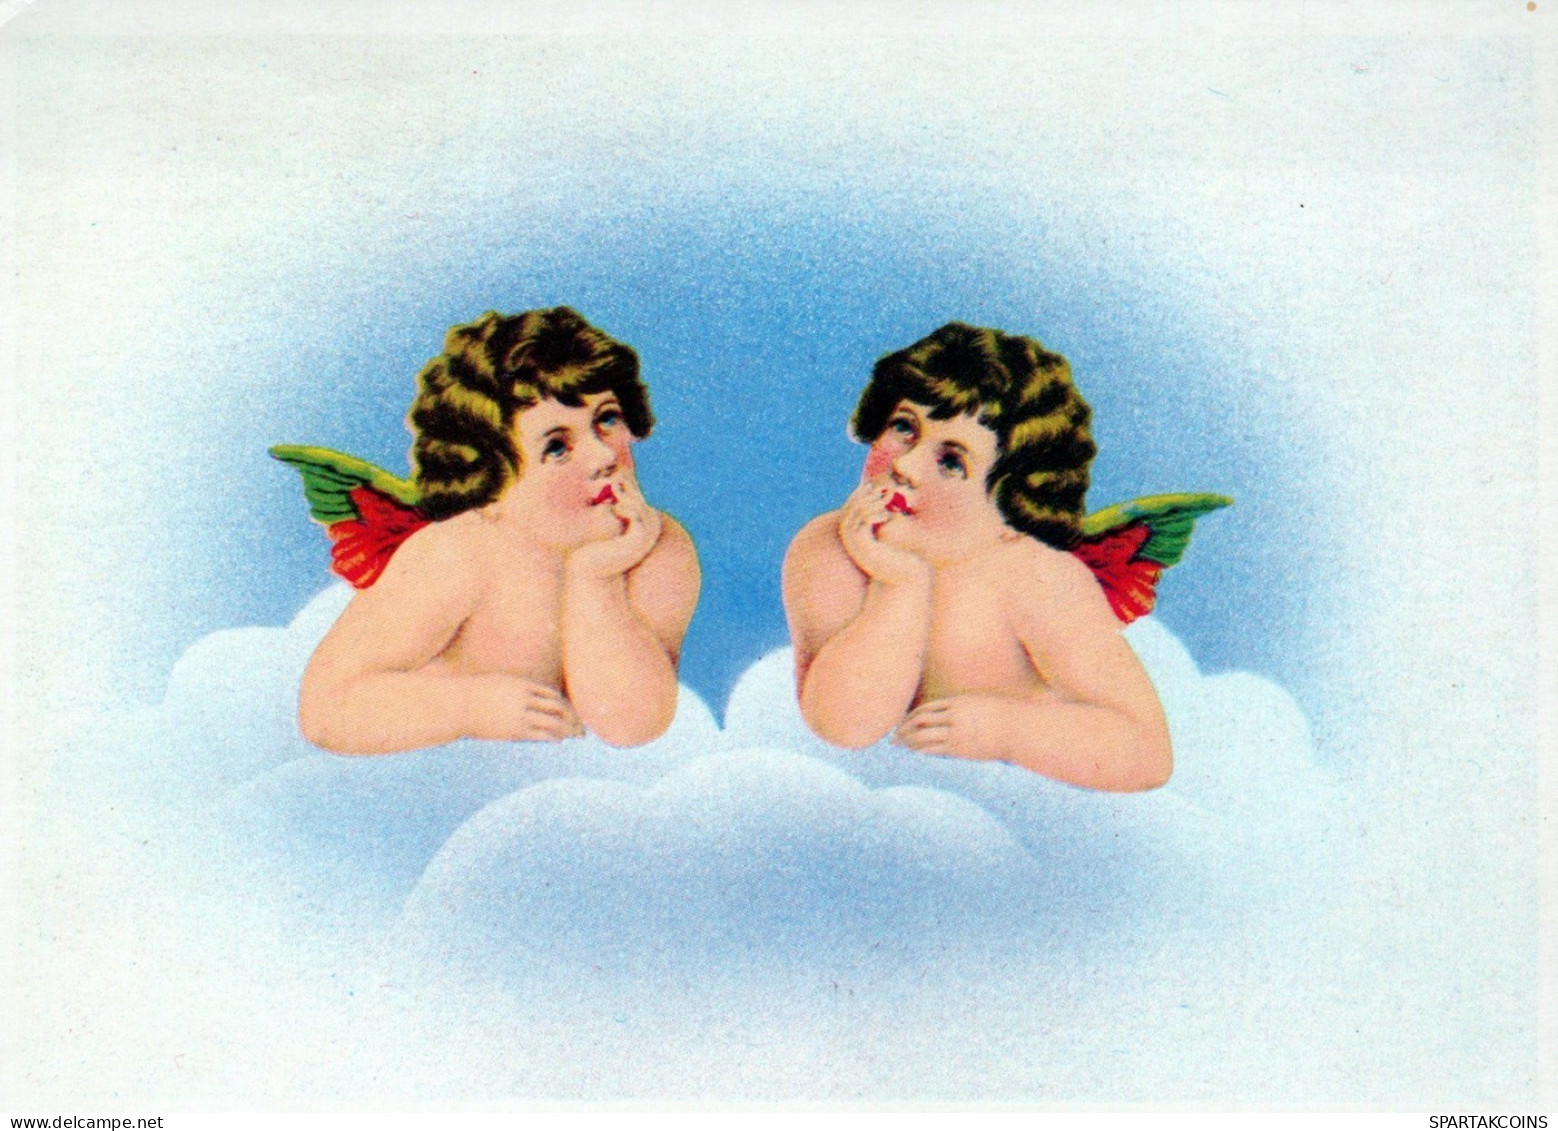 ANGELO Buon Anno Natale Vintage Cartolina CPSM #PAH037.IT - Anges